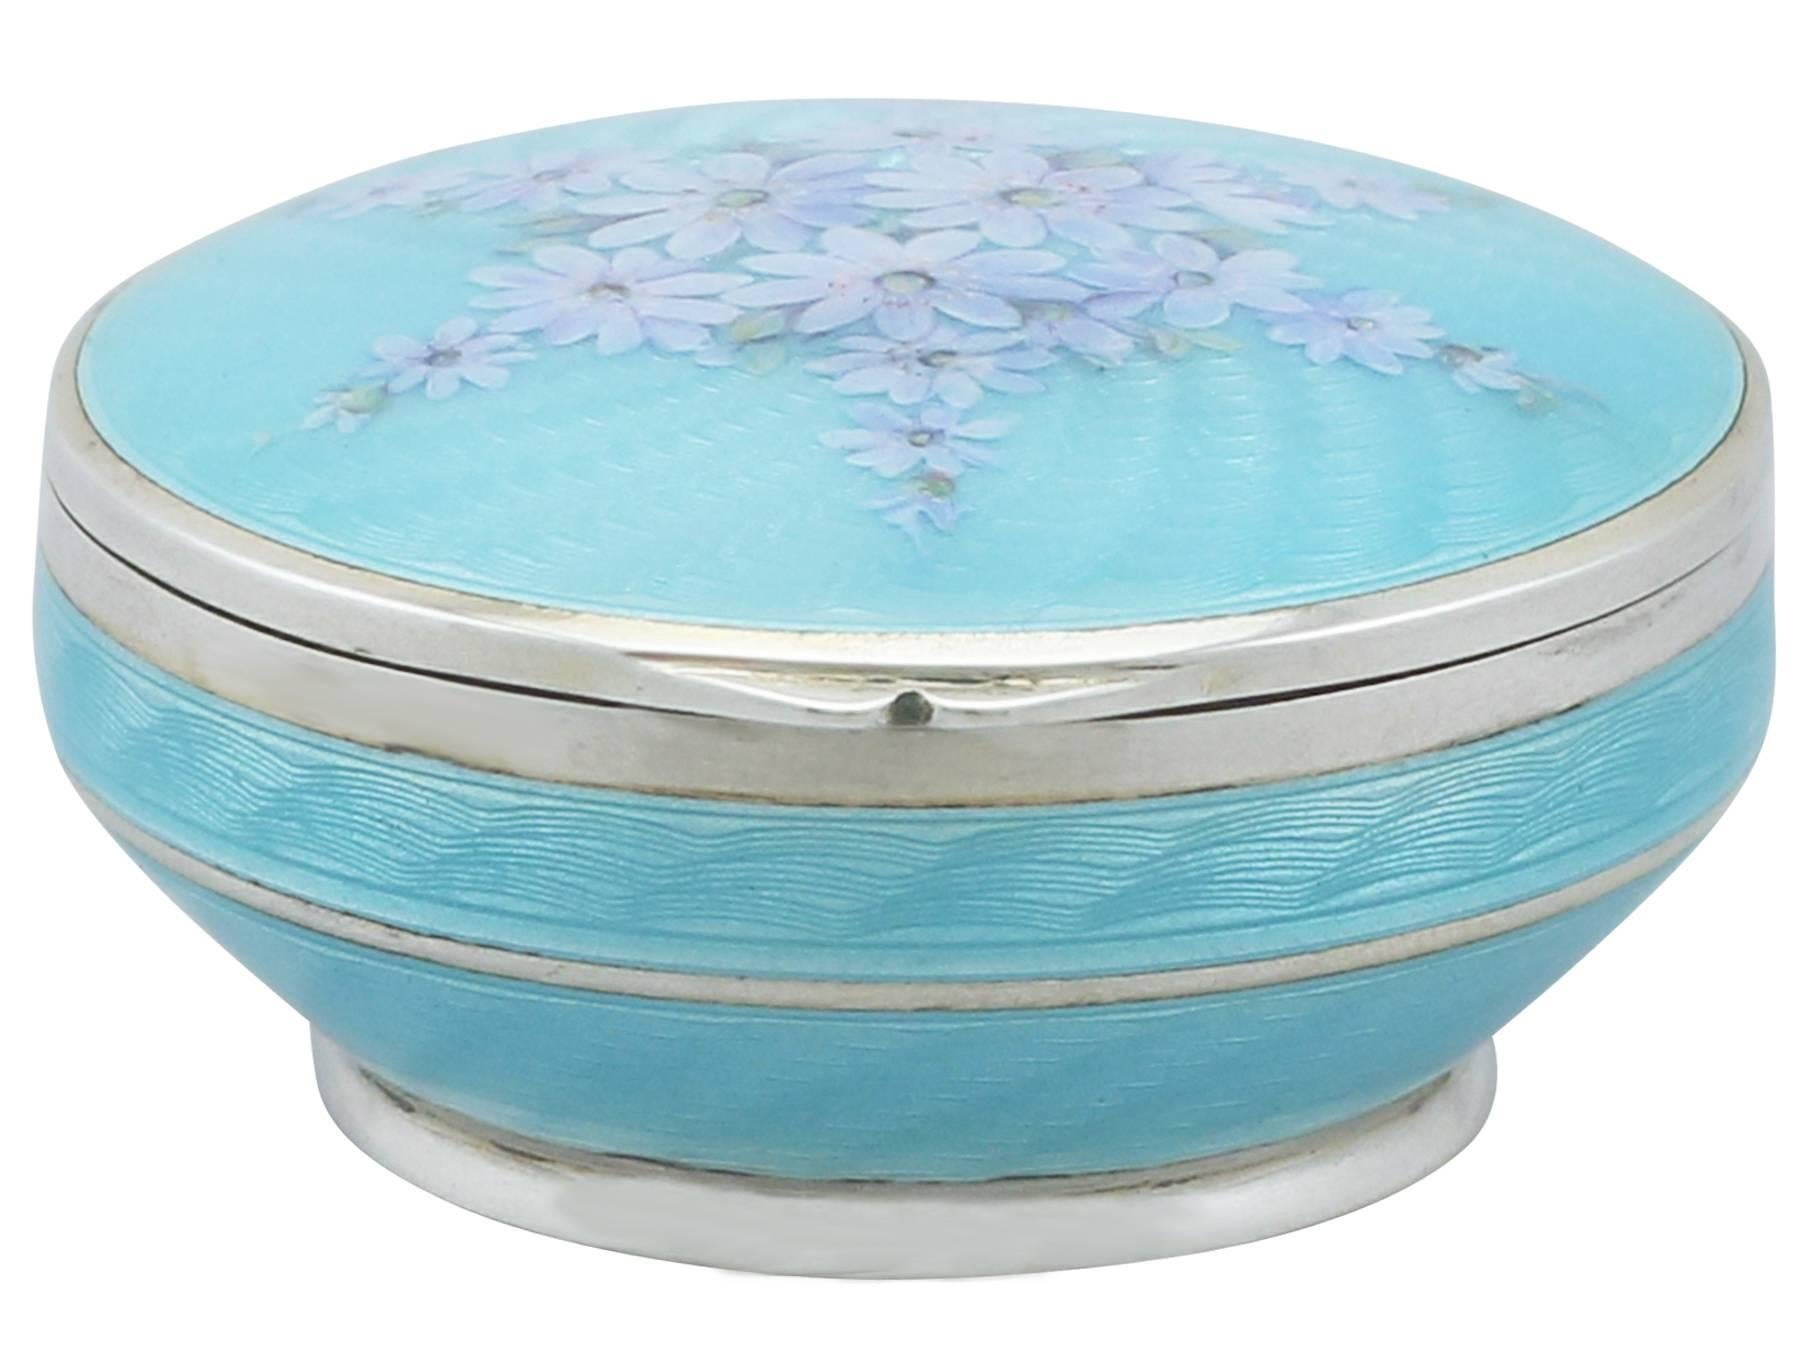 An exceptional, fine and impressive antique English sterling silver and enamel box; an addition to the ornamental silverware collection

This exceptional sterling silver and enamel antique box has a circular rounded form to a plain collet style